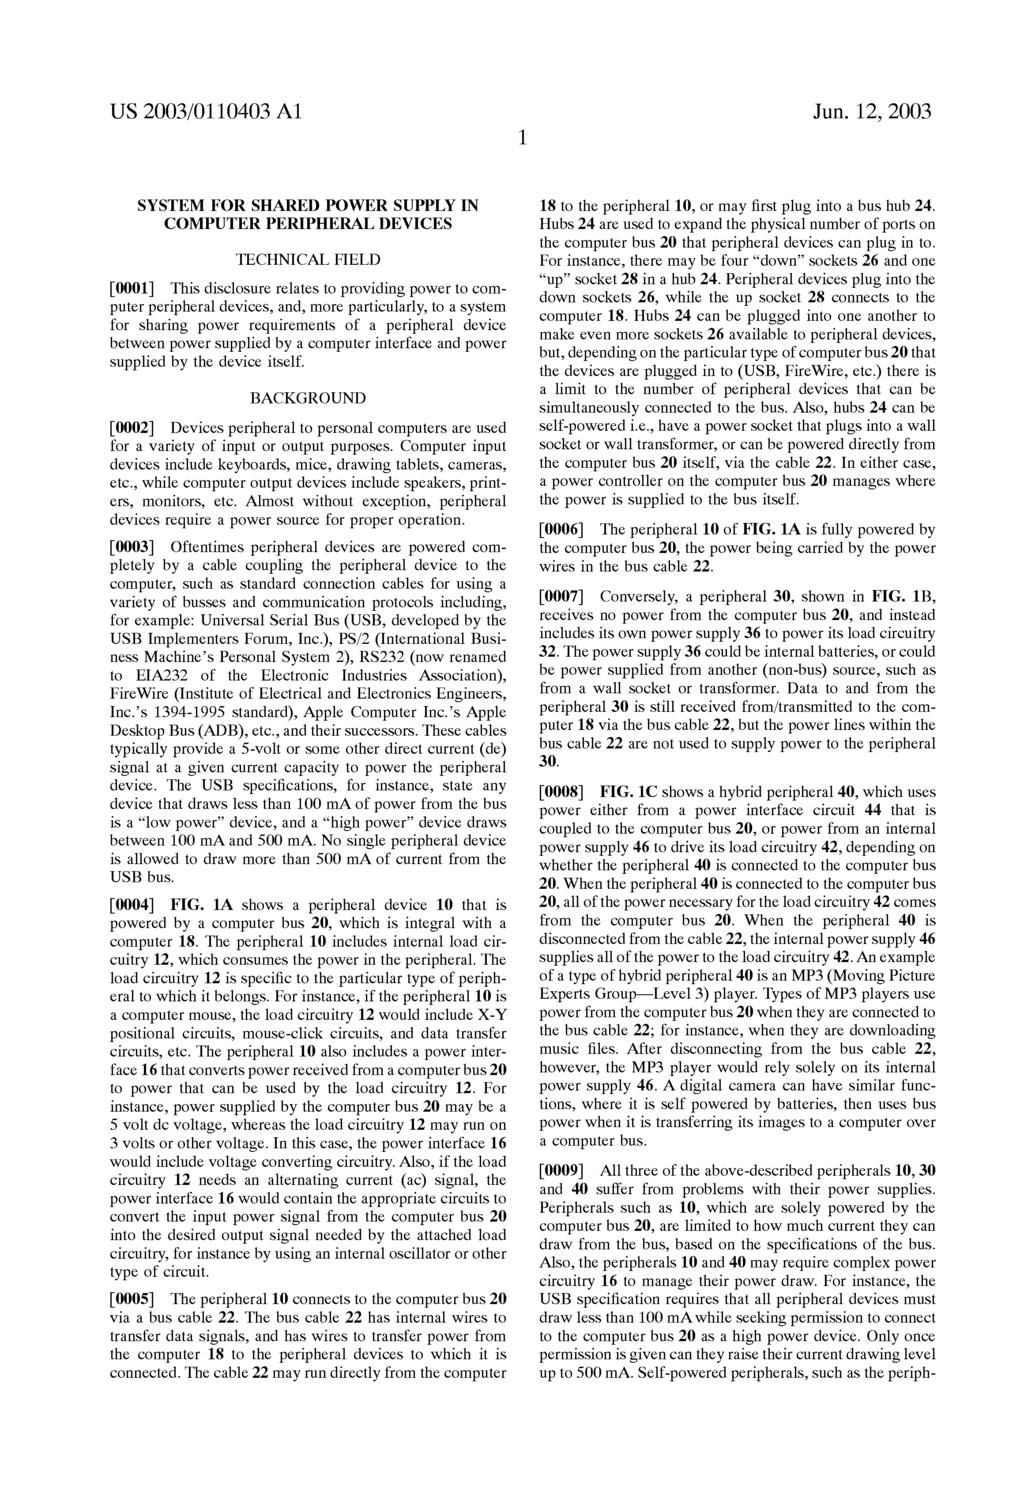 US 2003/0110403 A1 Jun. 12, 2003 SYSTEM FOR SHARED POWER SUPPLY IN COMPUTER PERIPHERAL DEVICES TECHNICAL FIELD 0001.